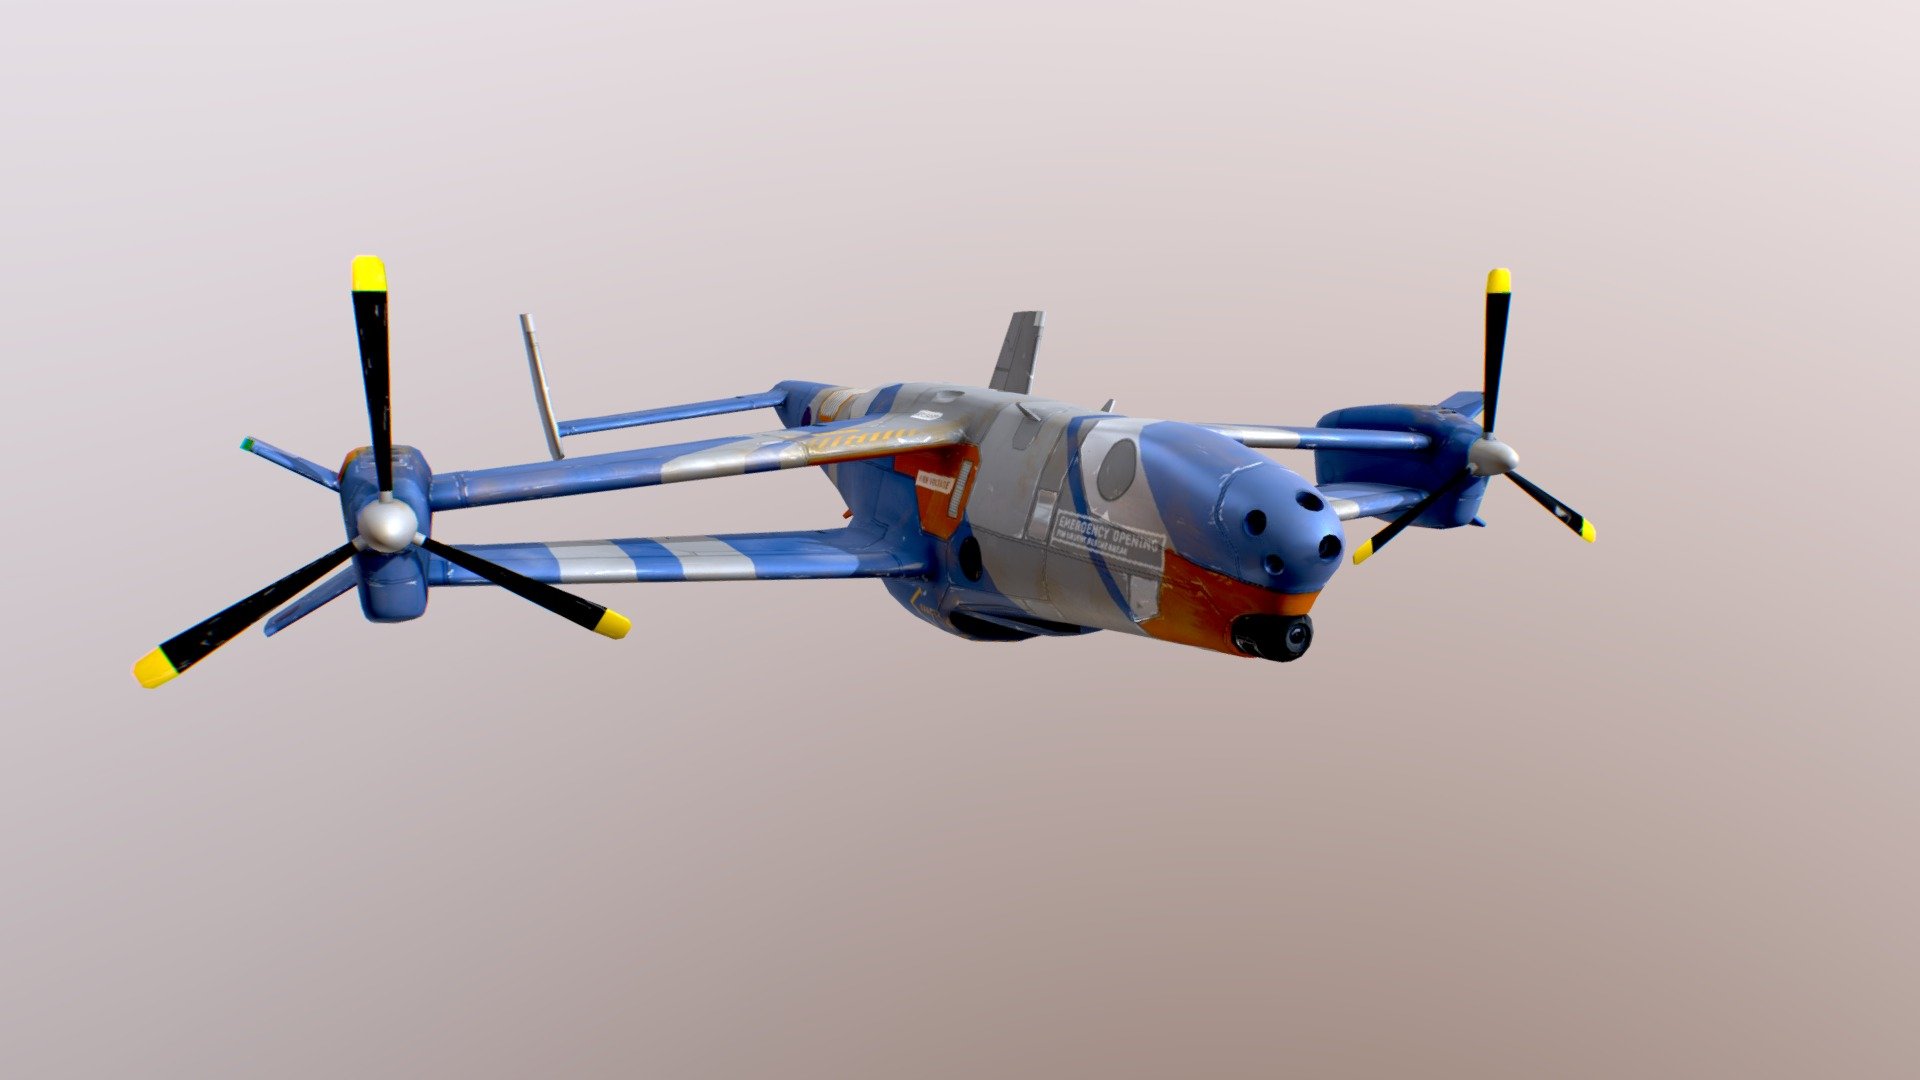 Retextured this aircraft for my WIP flying game. I am going for a late 90s realism aesthetic 3d model